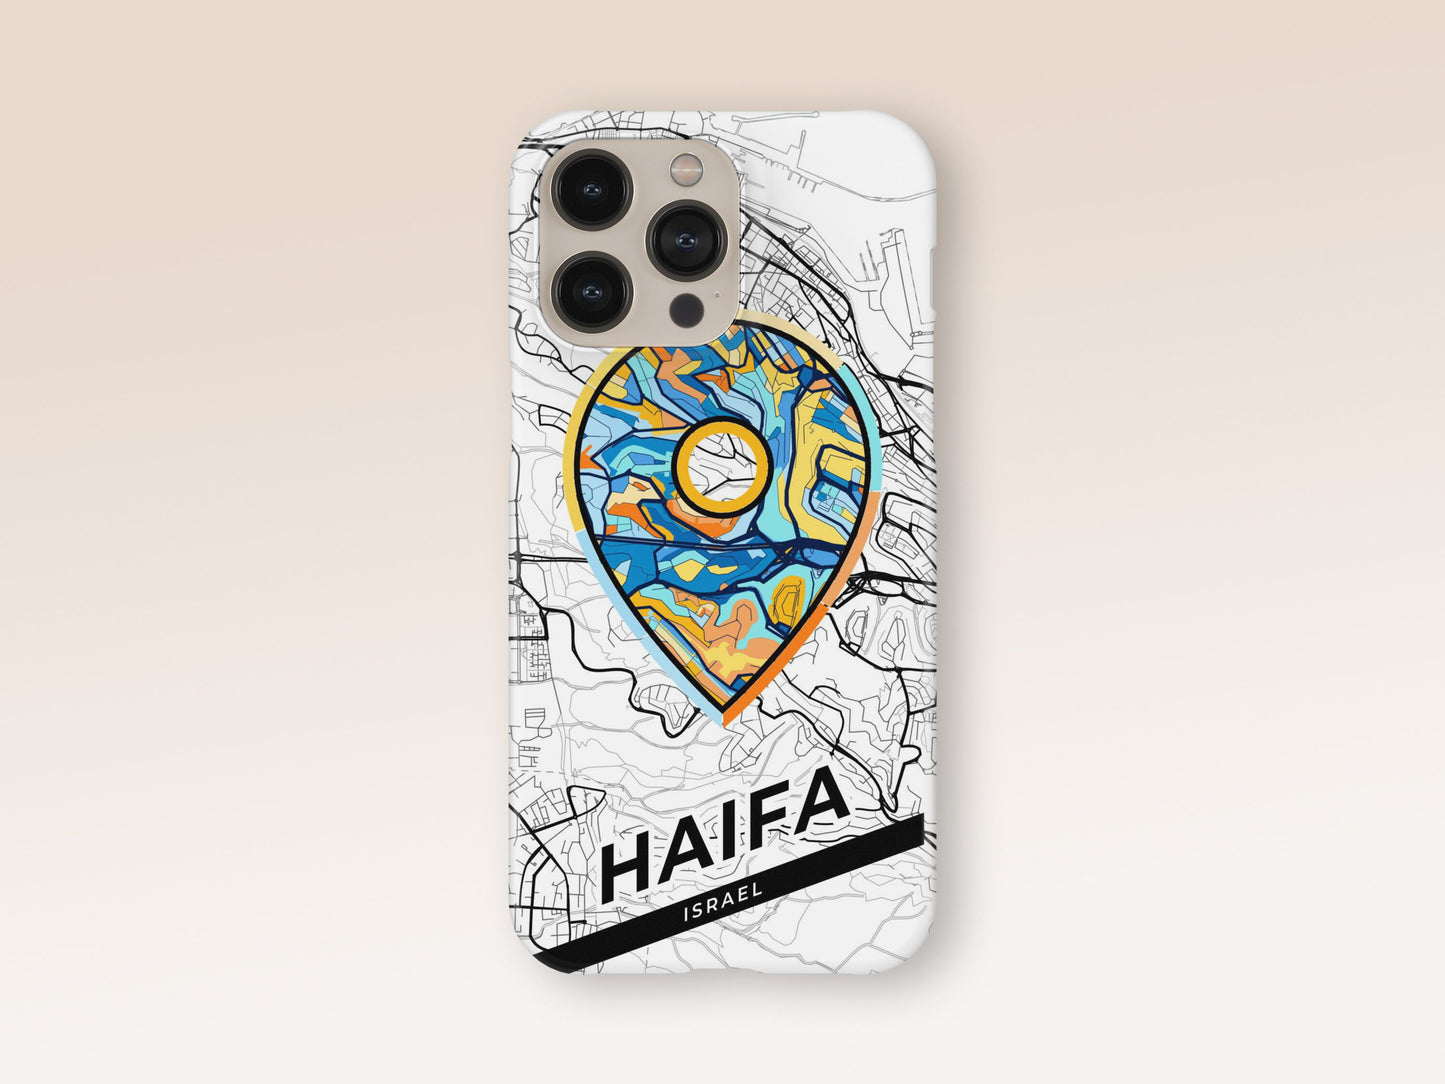 Haifa Israel slim phone case with colorful icon. Birthday, wedding or housewarming gift. Couple match cases. 1